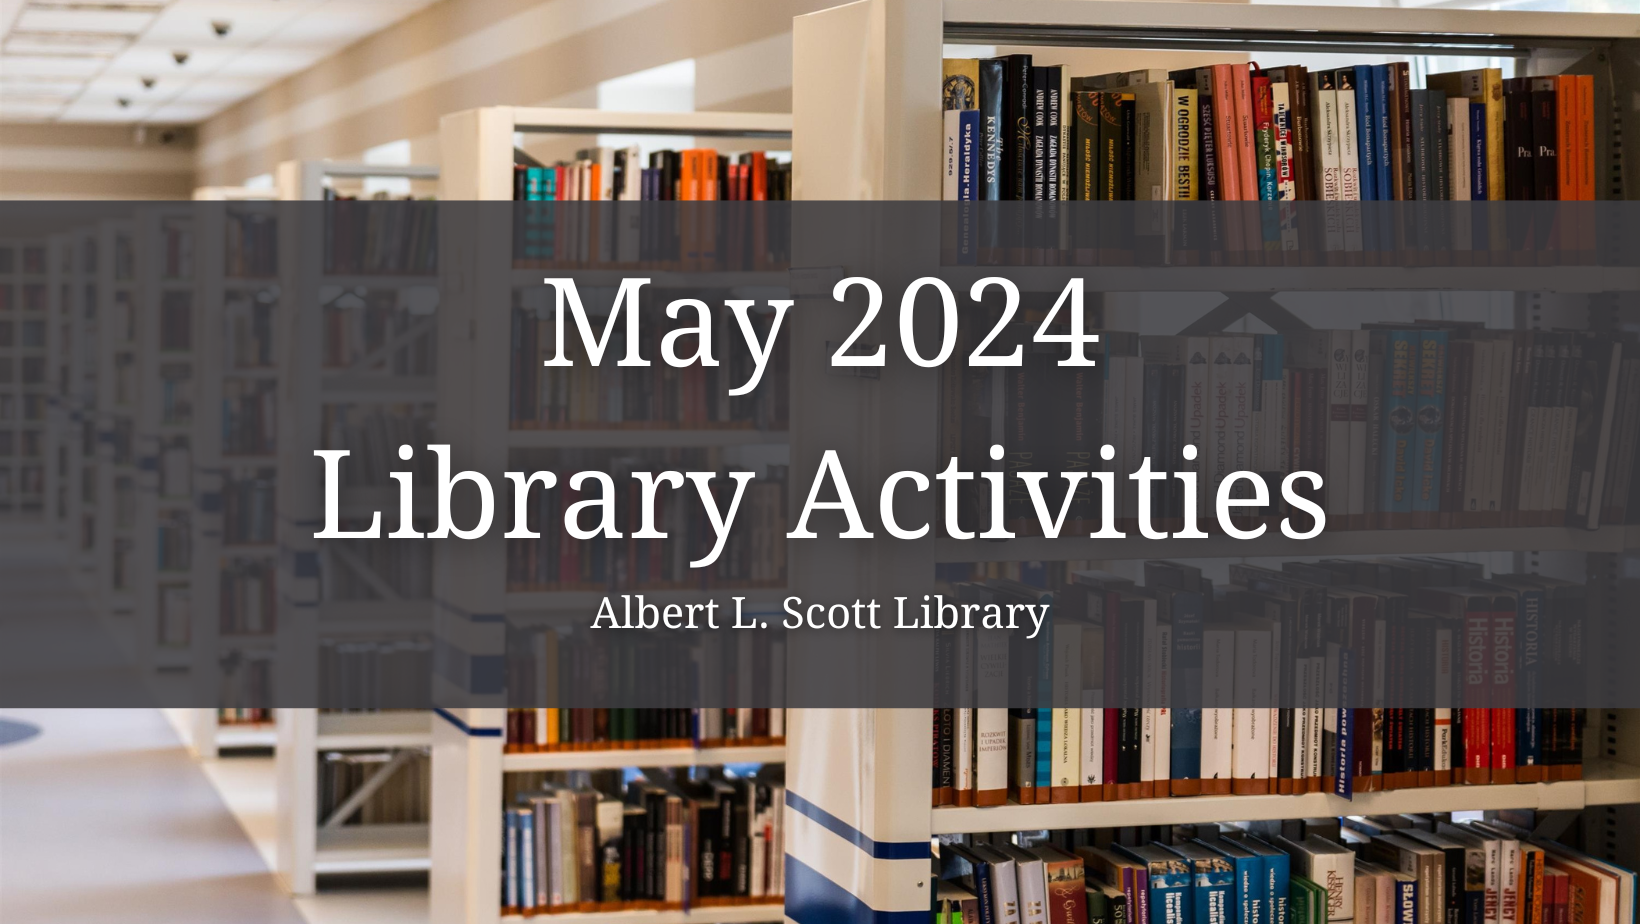 May Events at the Library